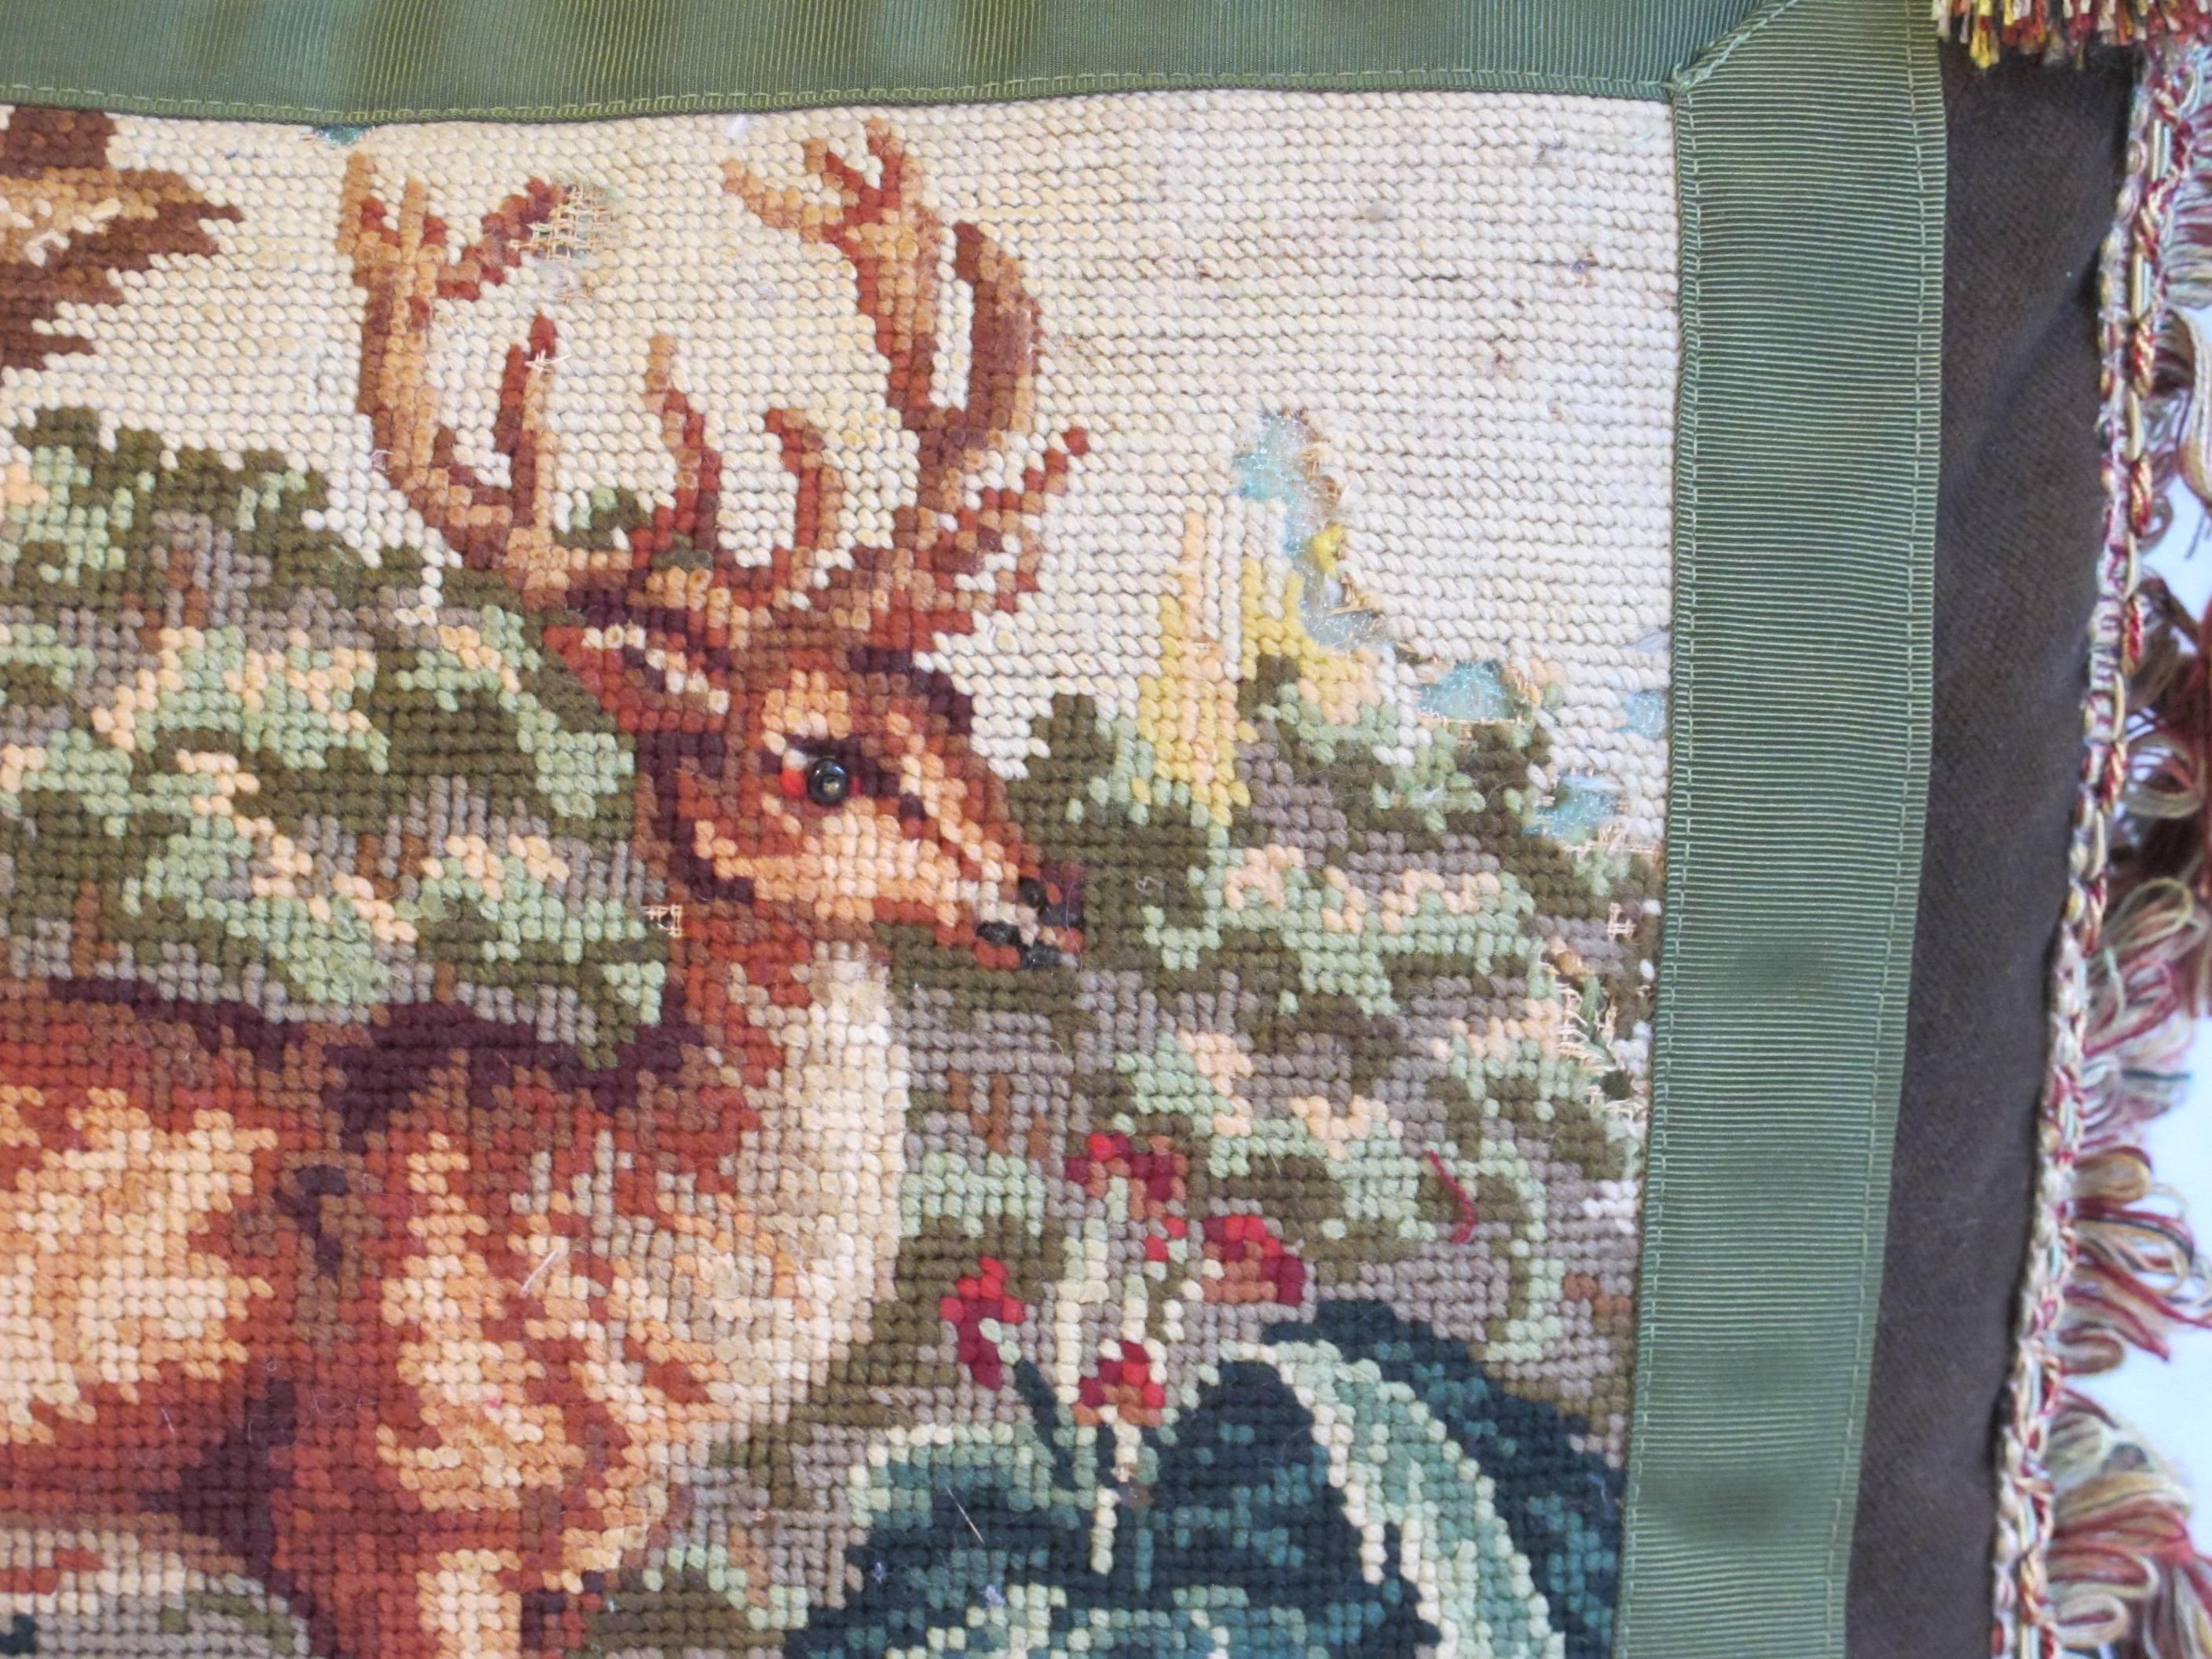 An early 20th century needlepoint tapestry depicting a forest scene with deer in gorgeous Autumn colors, embellished with vintage tassel trim and down insert is included.
Measures: 17